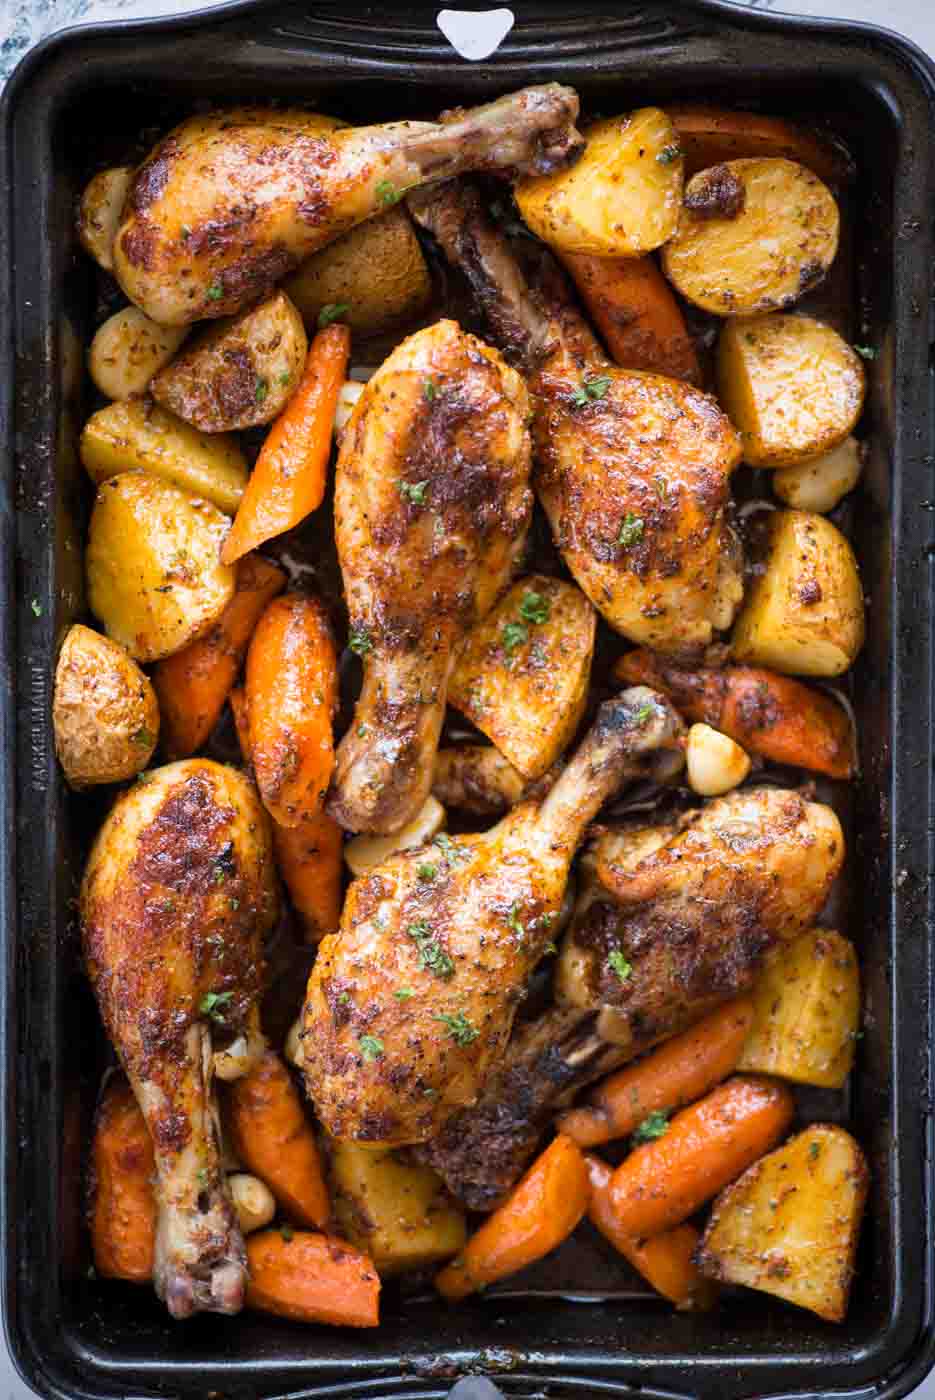 This baked Chicken legs with vegetable is a delicious one-pan dinner with minimal effort. Chicken and vegetables tossed in a ranch marinade and cooked until tender and juicy.